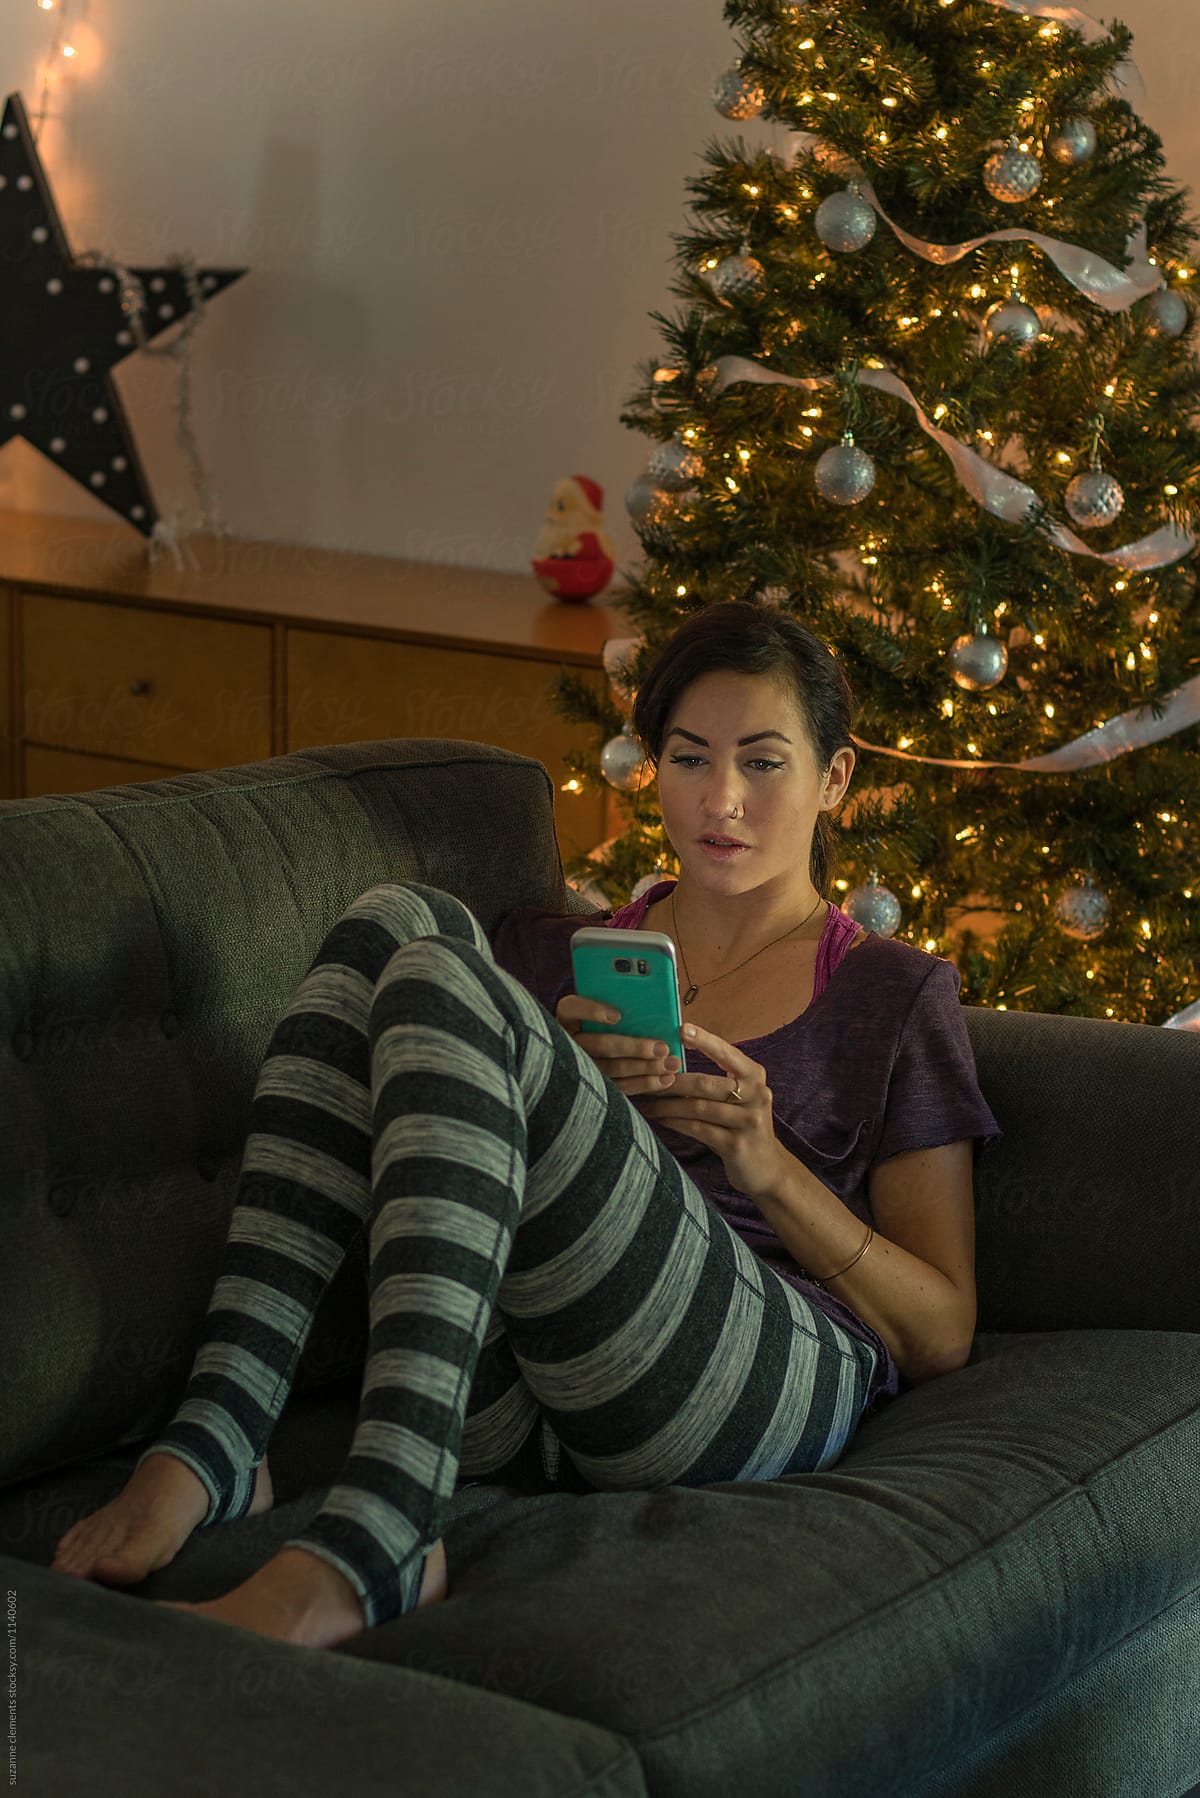 Woman Relaxing by her Christmas Tree at the Holidays